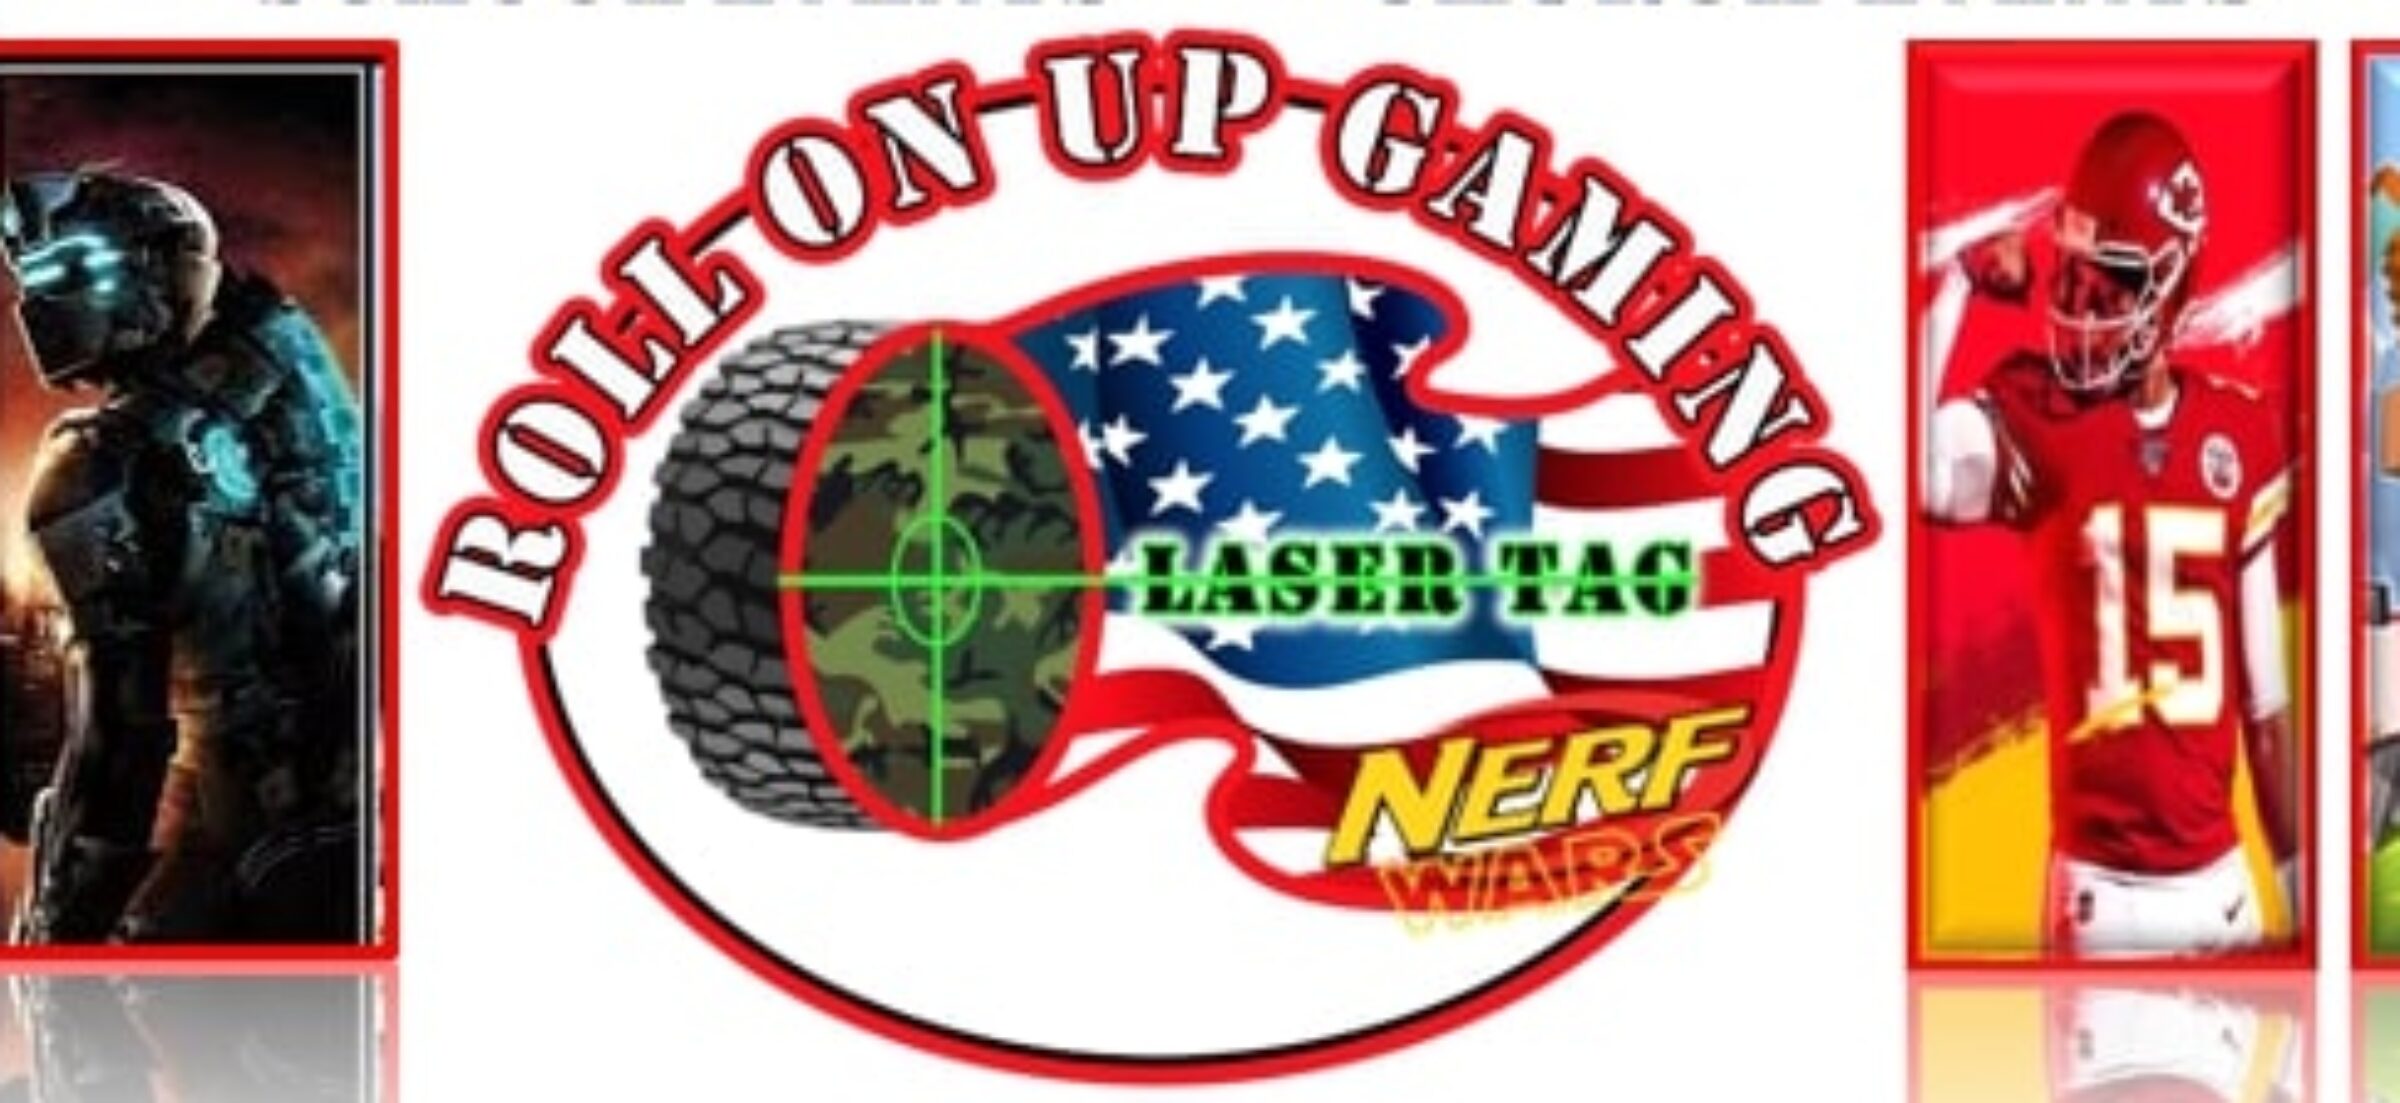 Roll On Up Gaming – North Carolina Video Game Truck, Laser Tag, & NERF WAR Party!